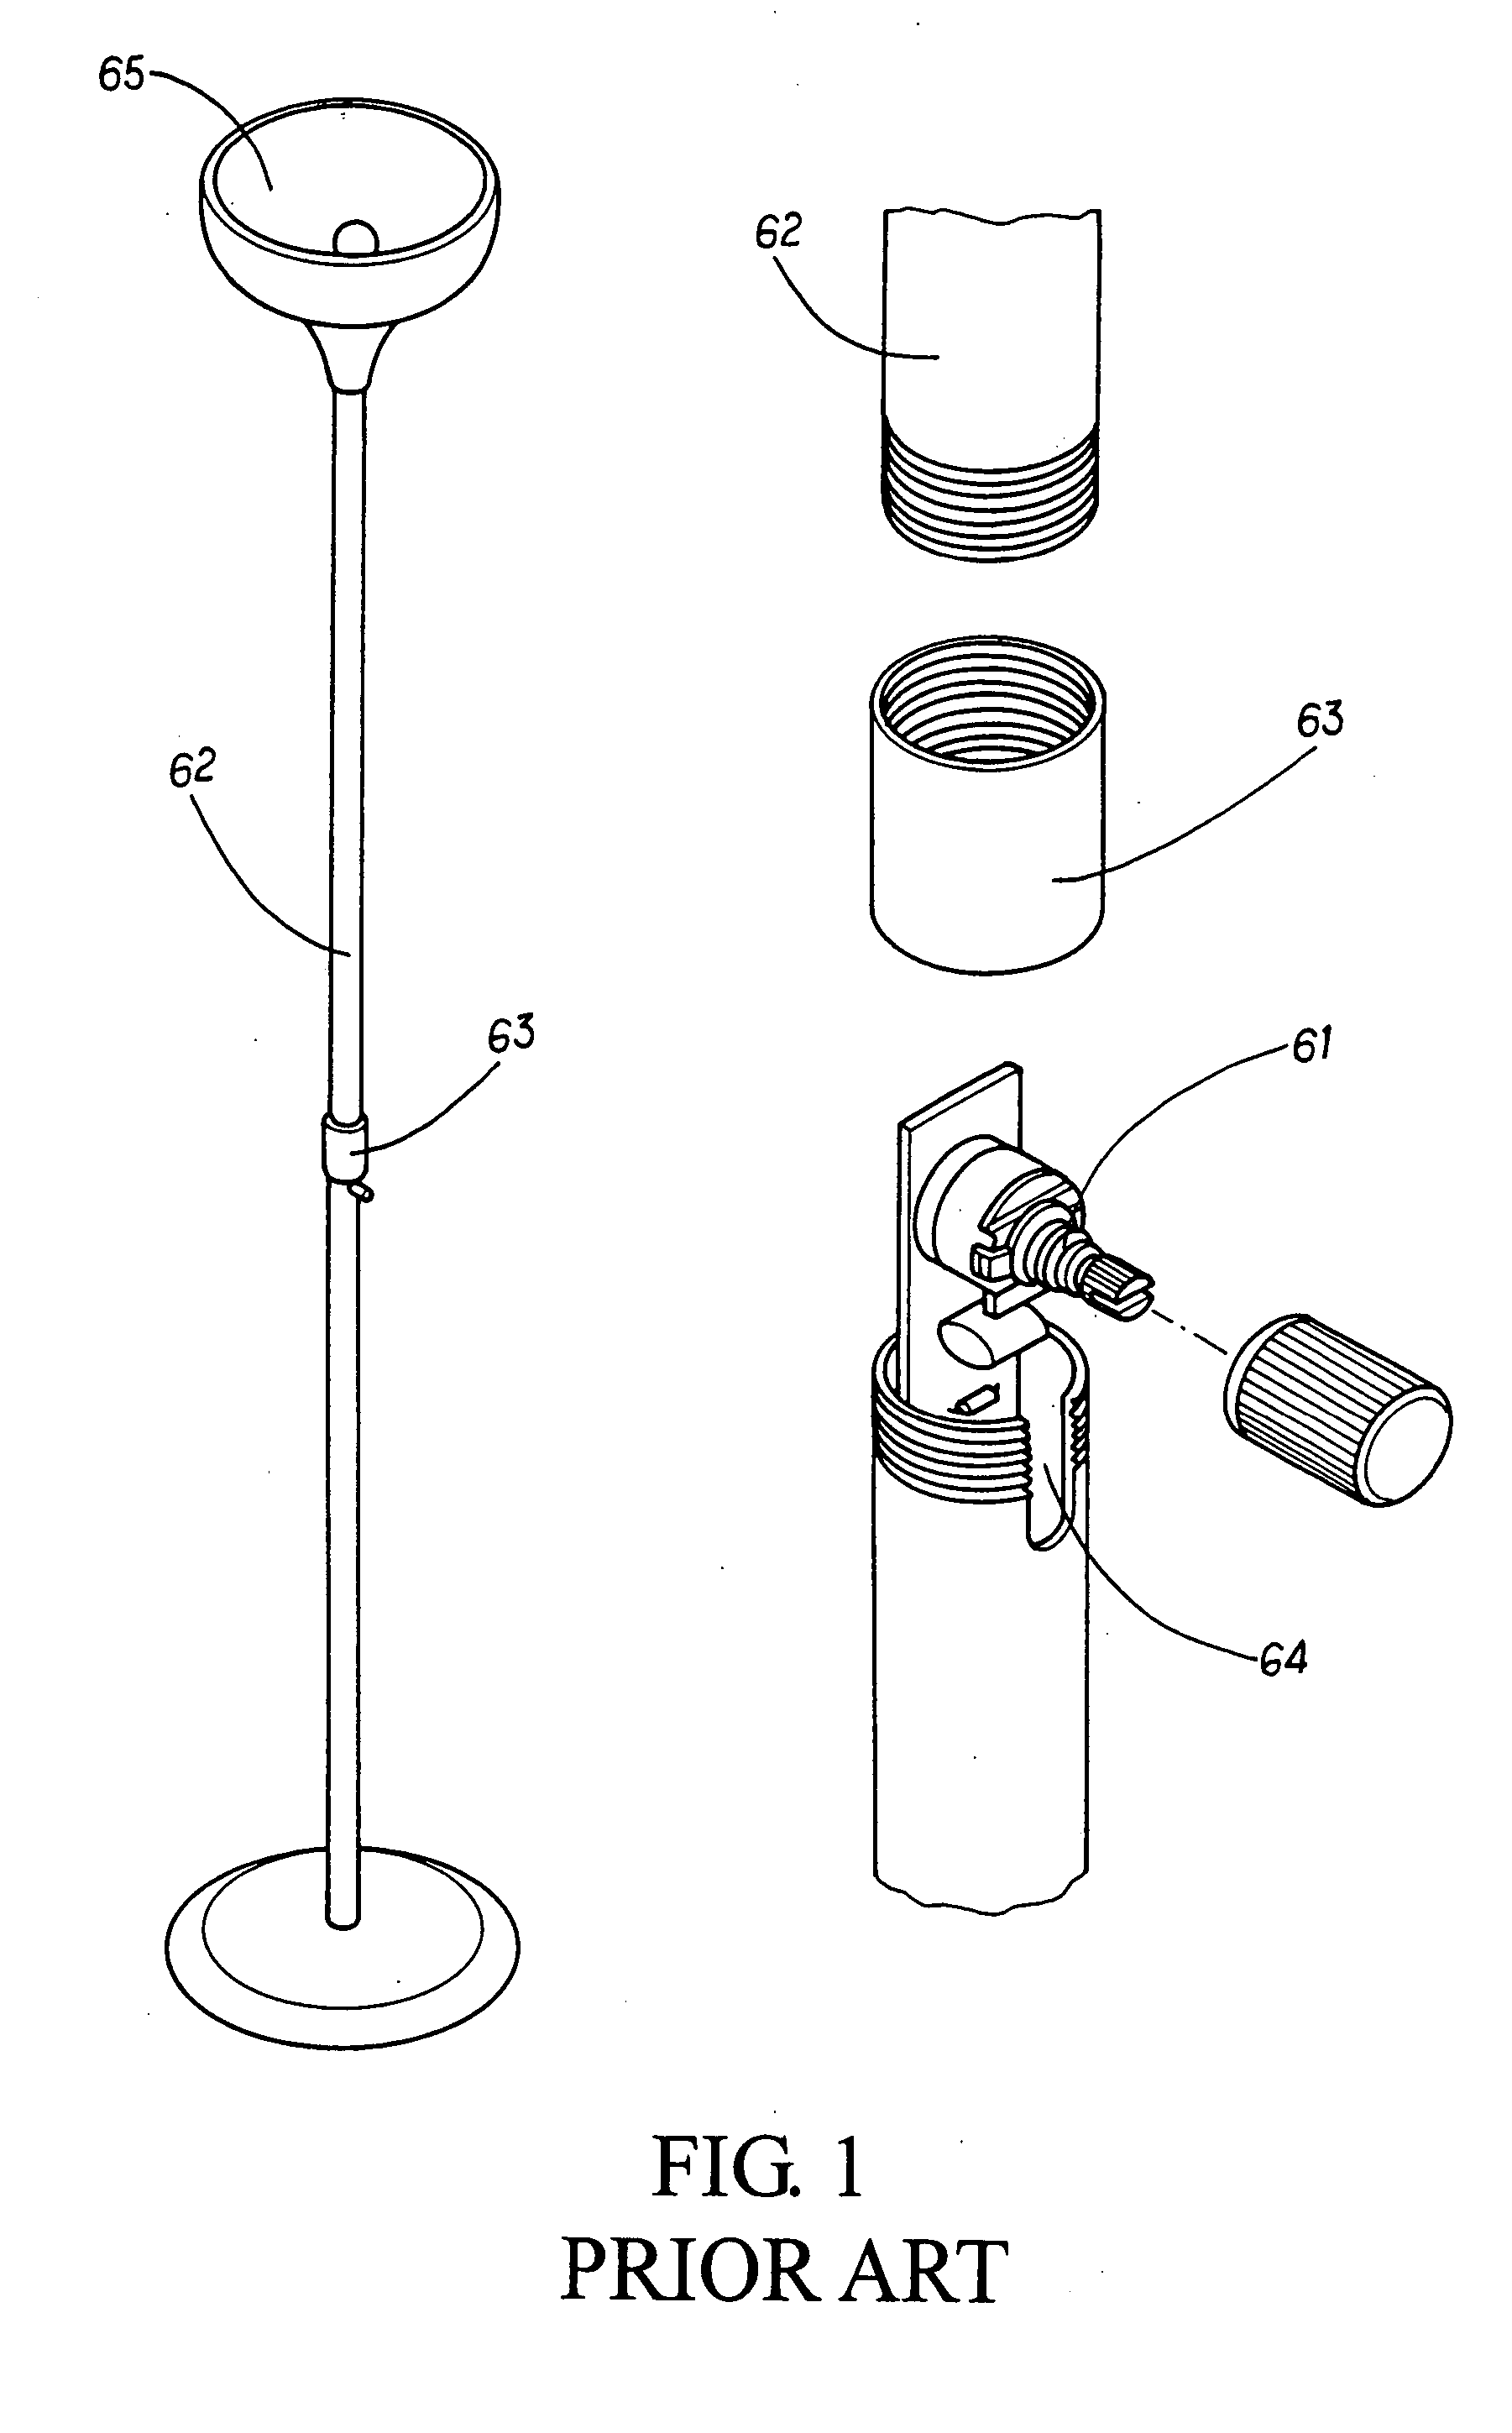 Rotation-controlled lamp for controlling actuation and de-actuation of the lamp